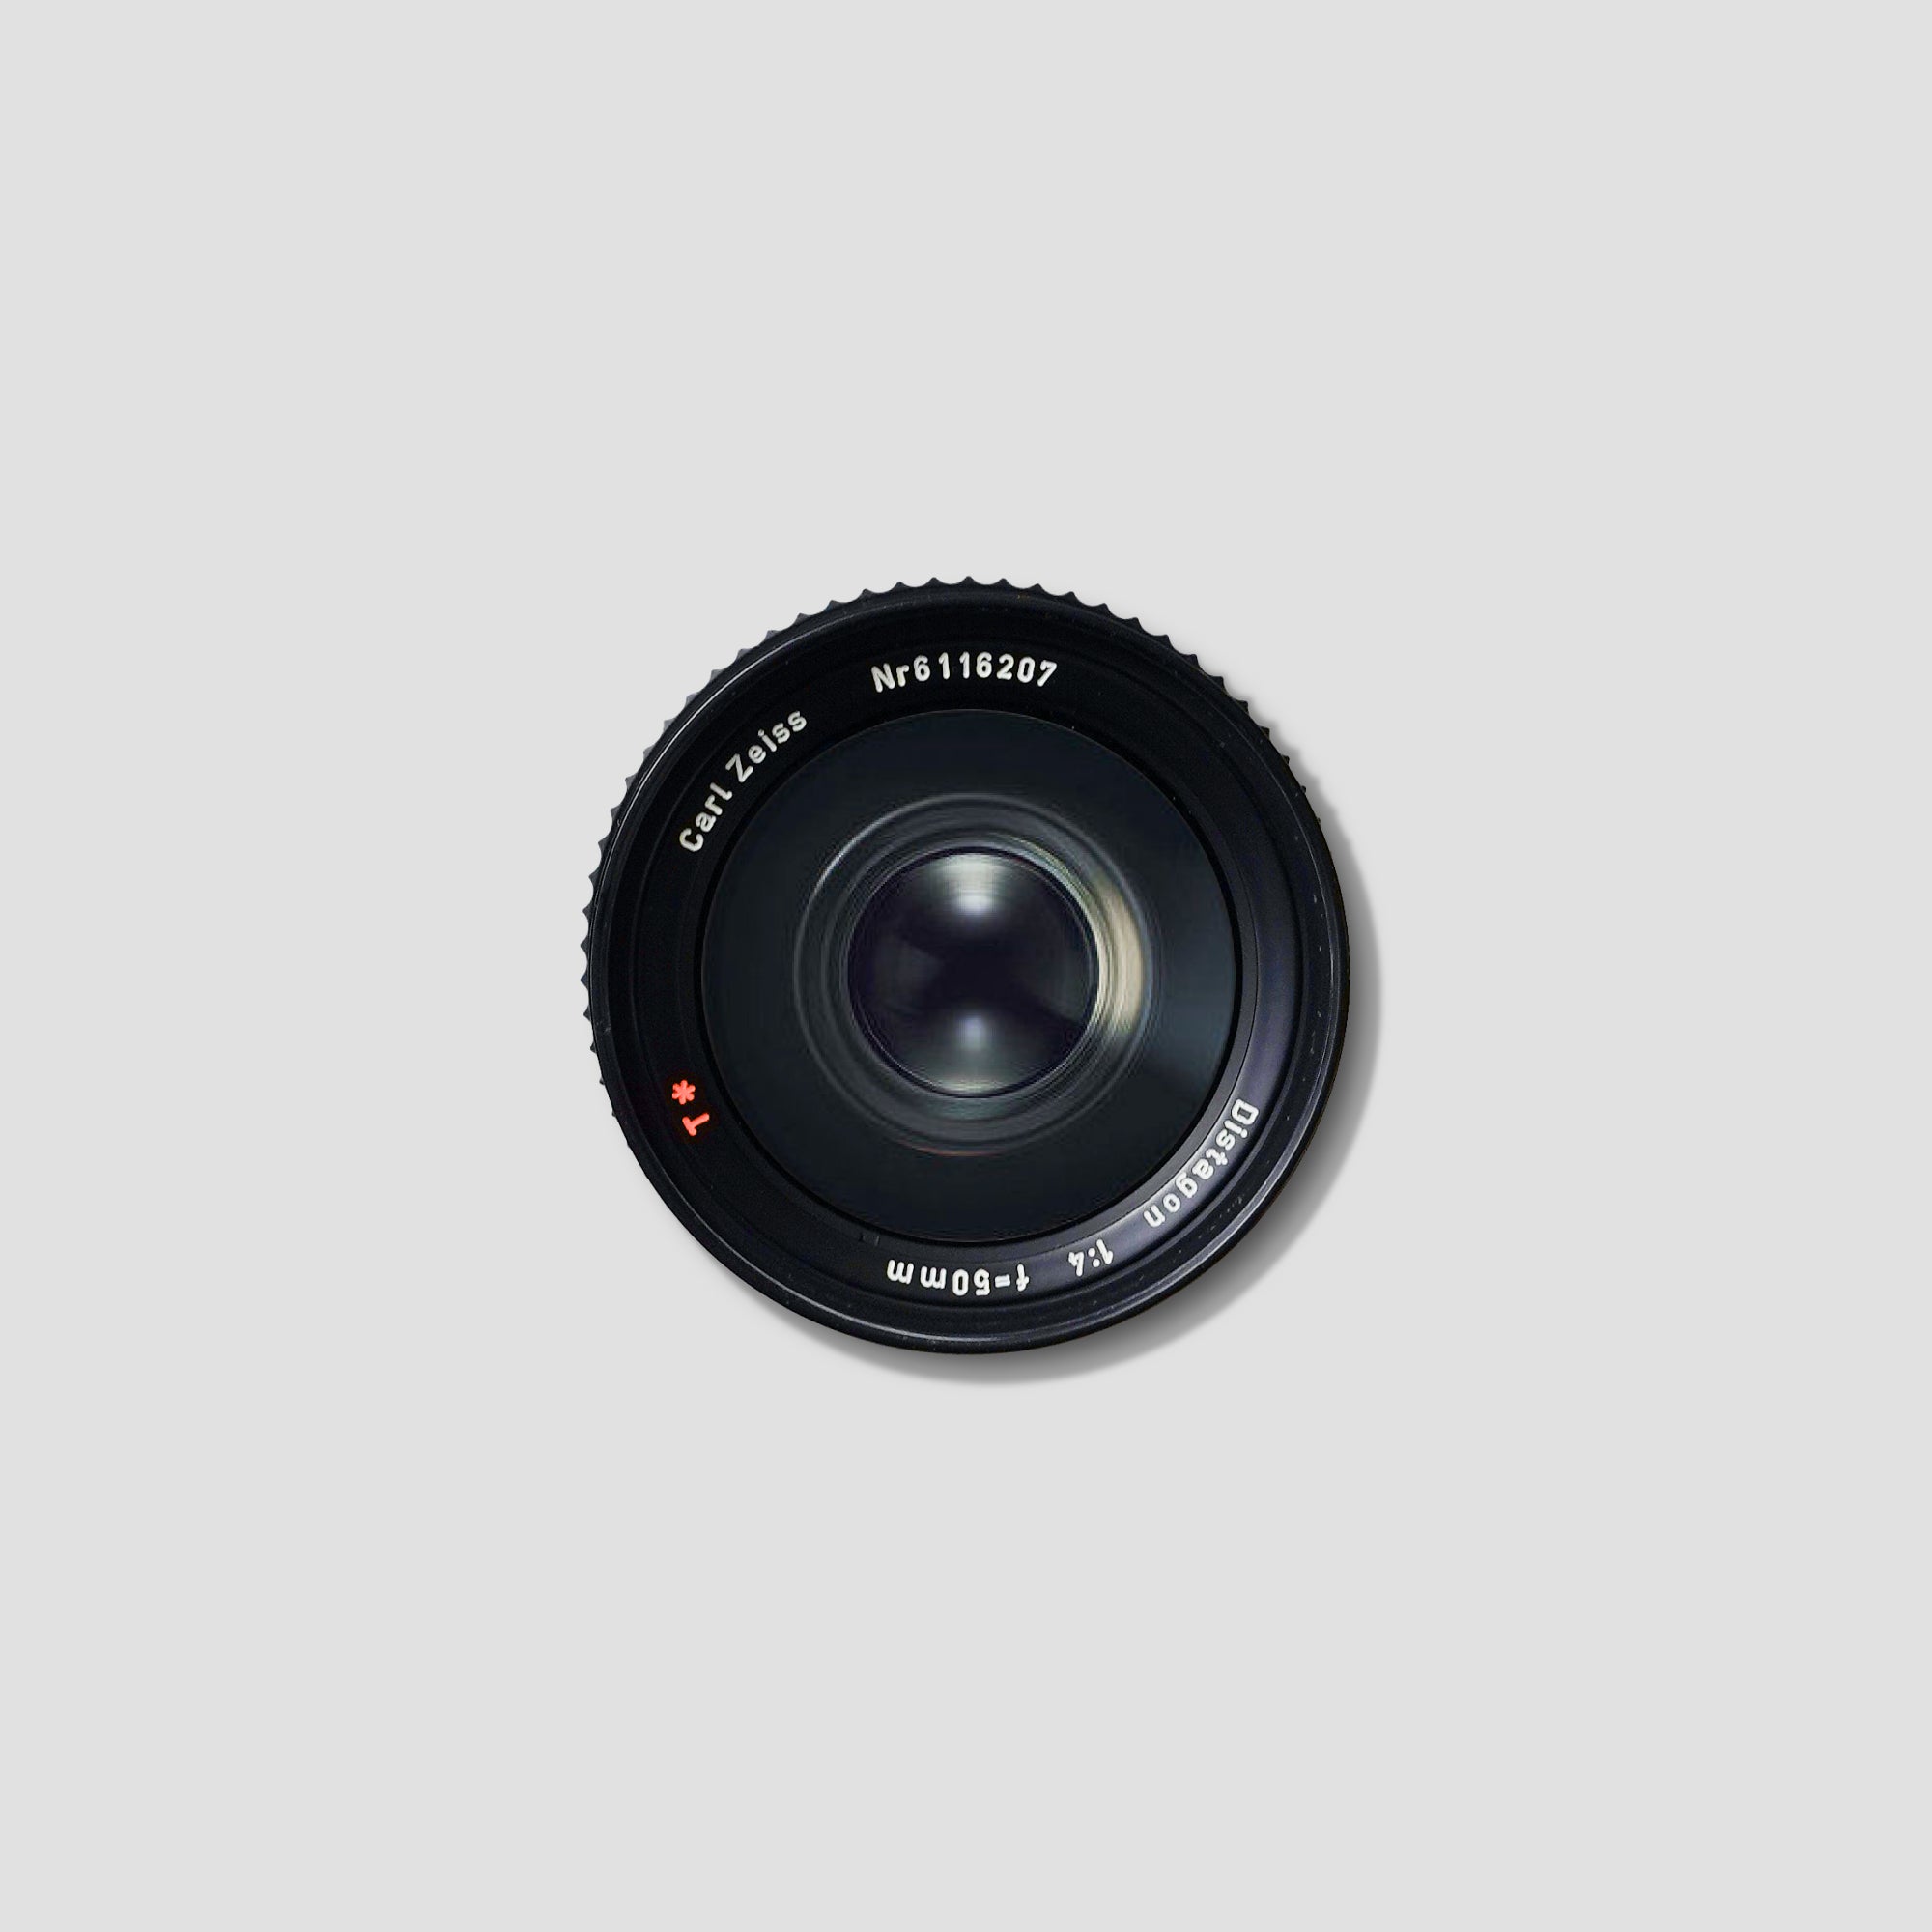 Buy Distagon CF 50mm f4 T* now at Analogue Amsterdam